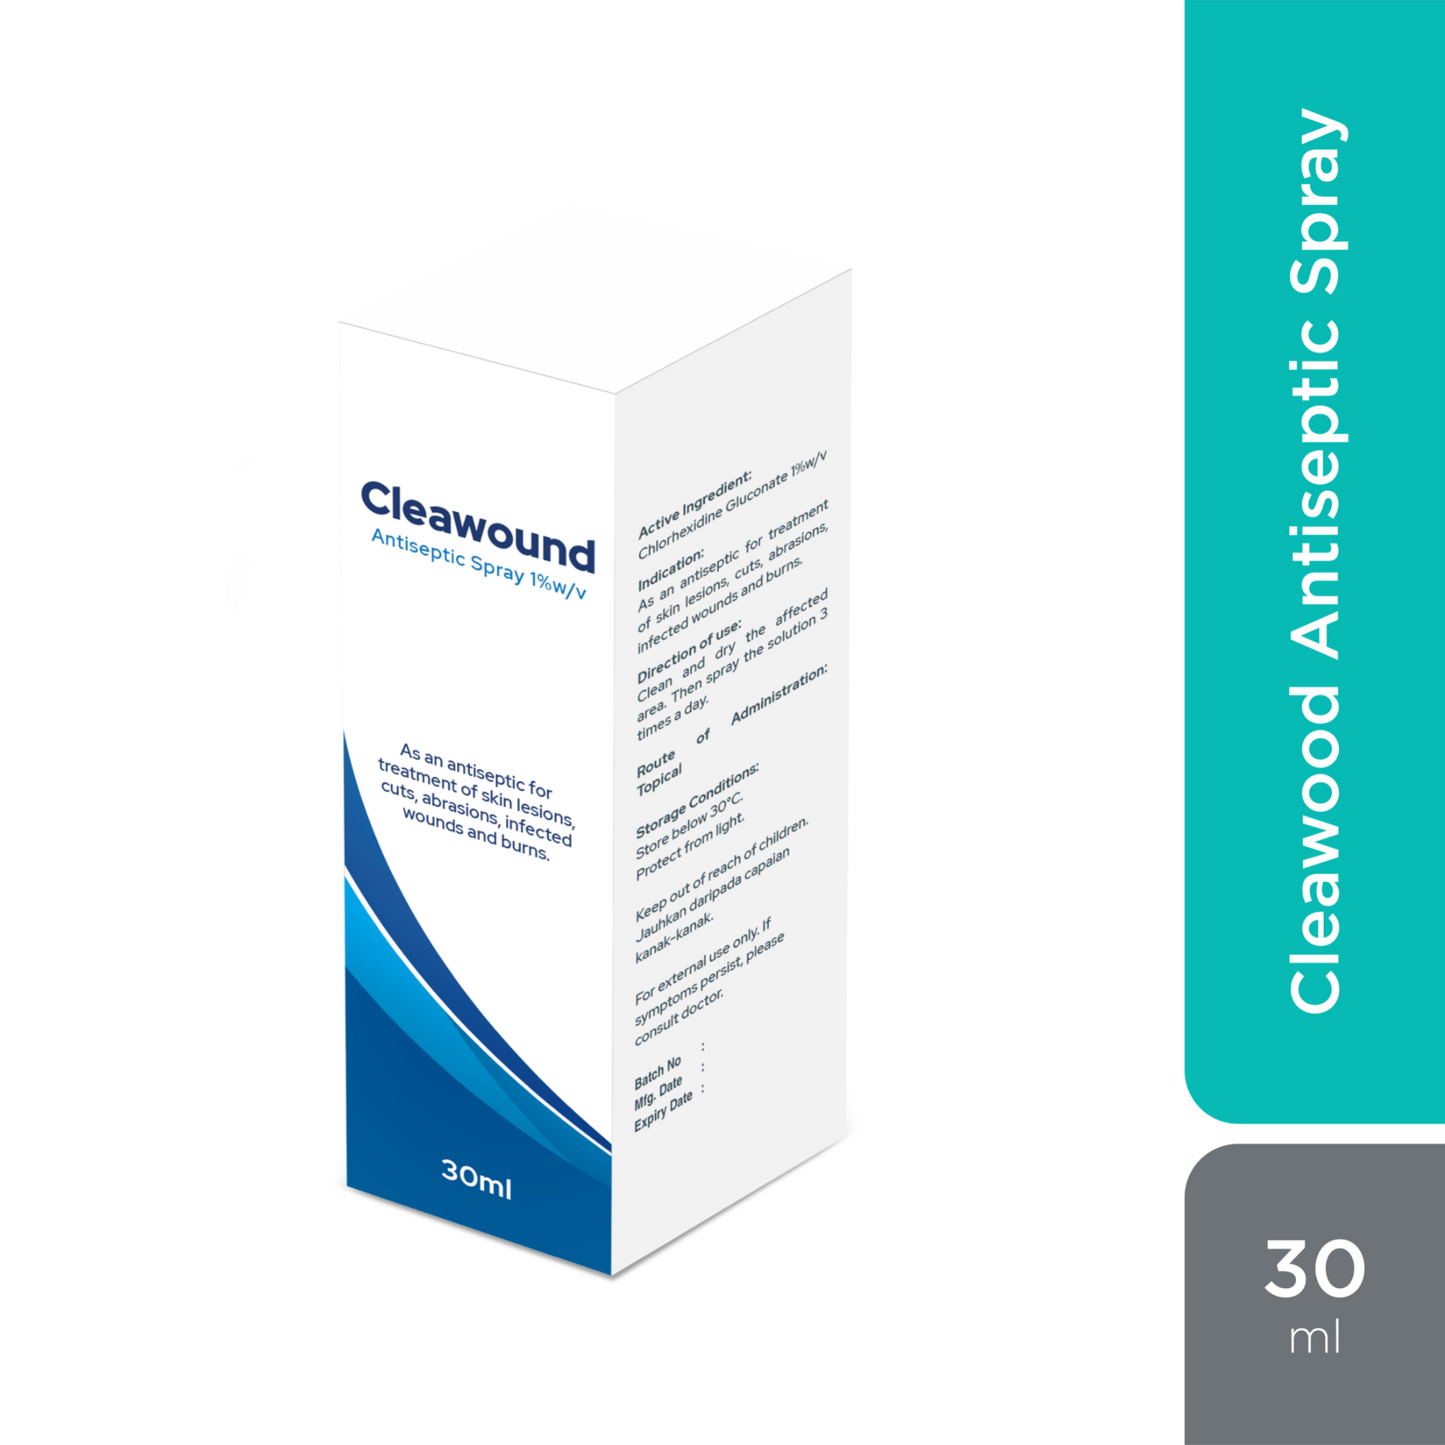 Cleawound Antiseptic Spray